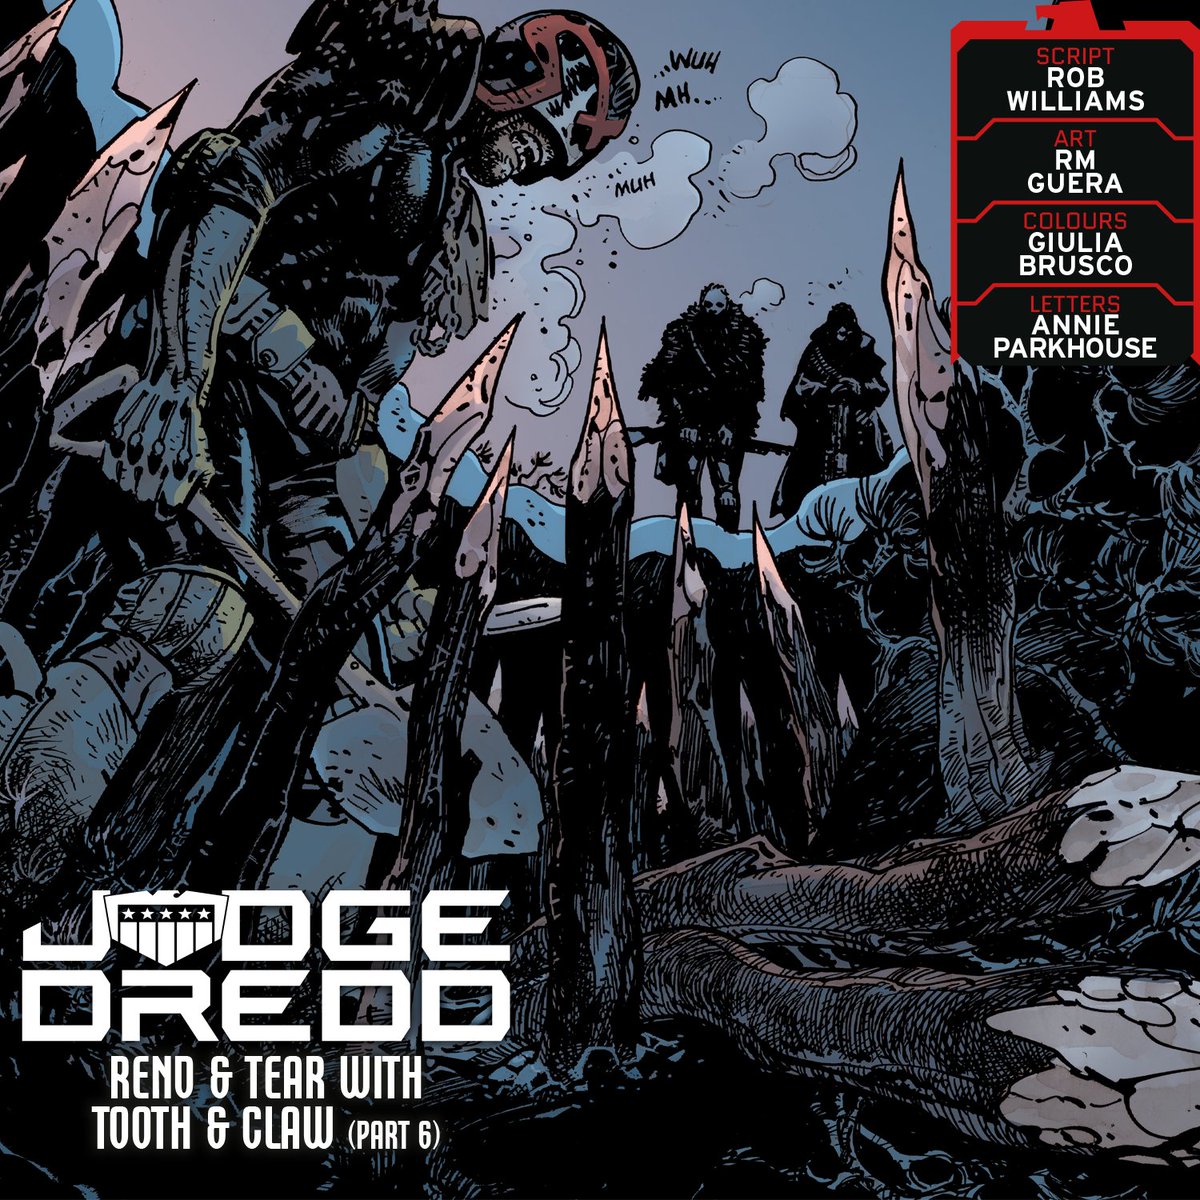 2000 AD Prog 2381 is out on 8th May - concluding JUDGE DREDD: REND & TEAR WITH TOOTH & CLAW with part six by: 📝 Script: @Robwilliams71 ✏️ Art: R.M. Guera 🎨 Colours: Giulia Brusco 💬 Letters: Annie Parkhouse Subscribe now and get zarjaz free gifts ➡️ bit.ly/2Ws04uc